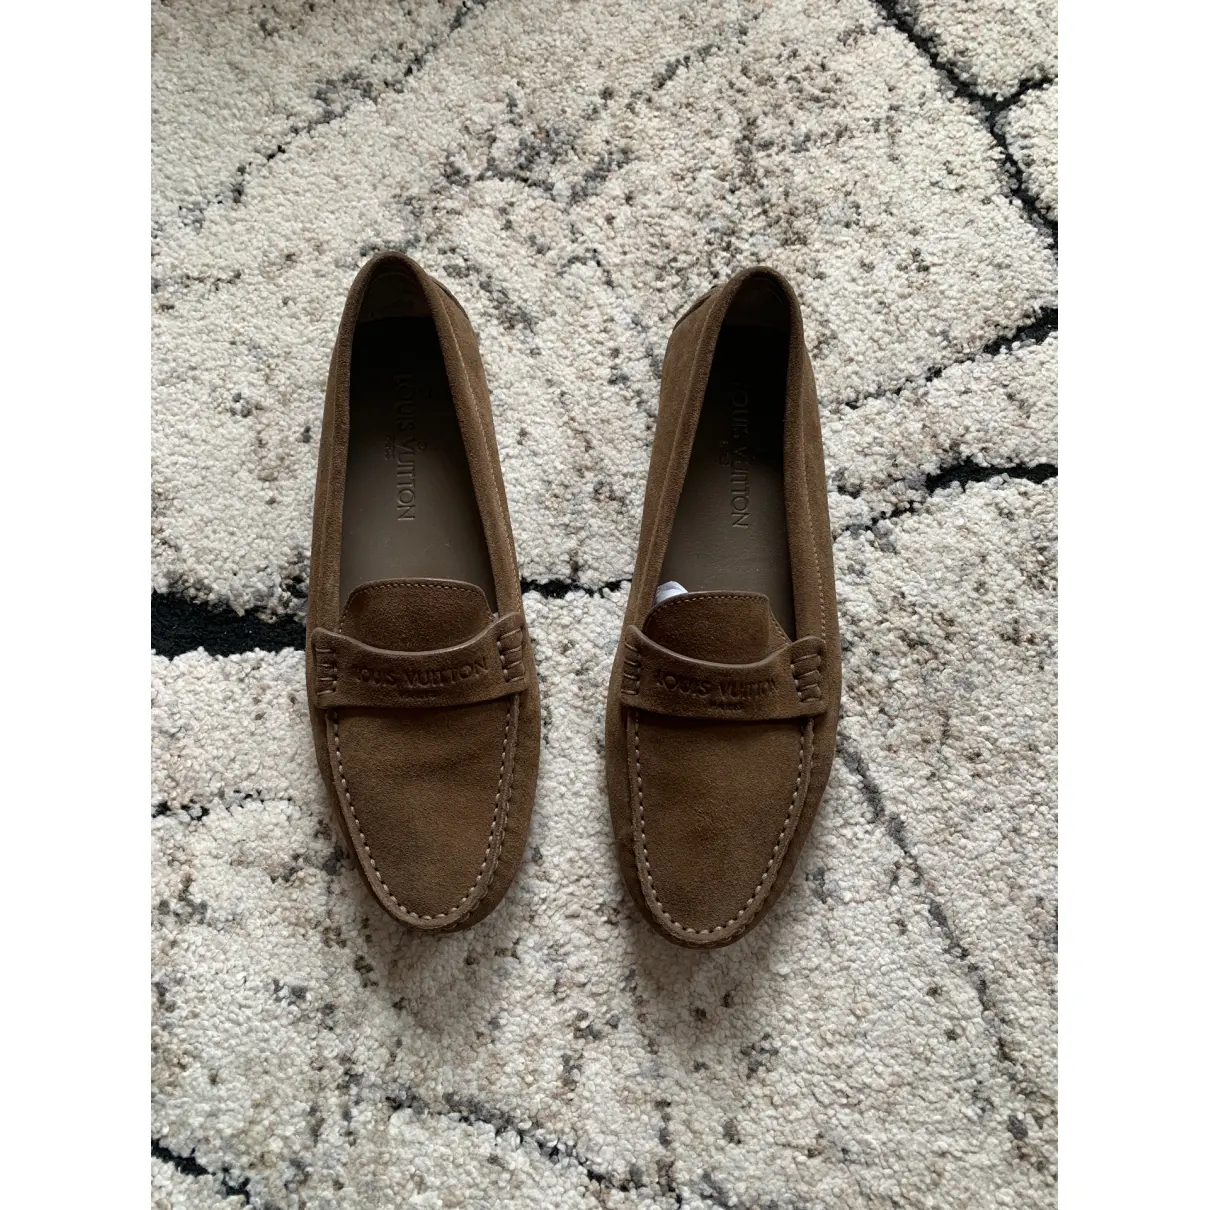 Buy Louis Vuitton Dauphine leather flats online